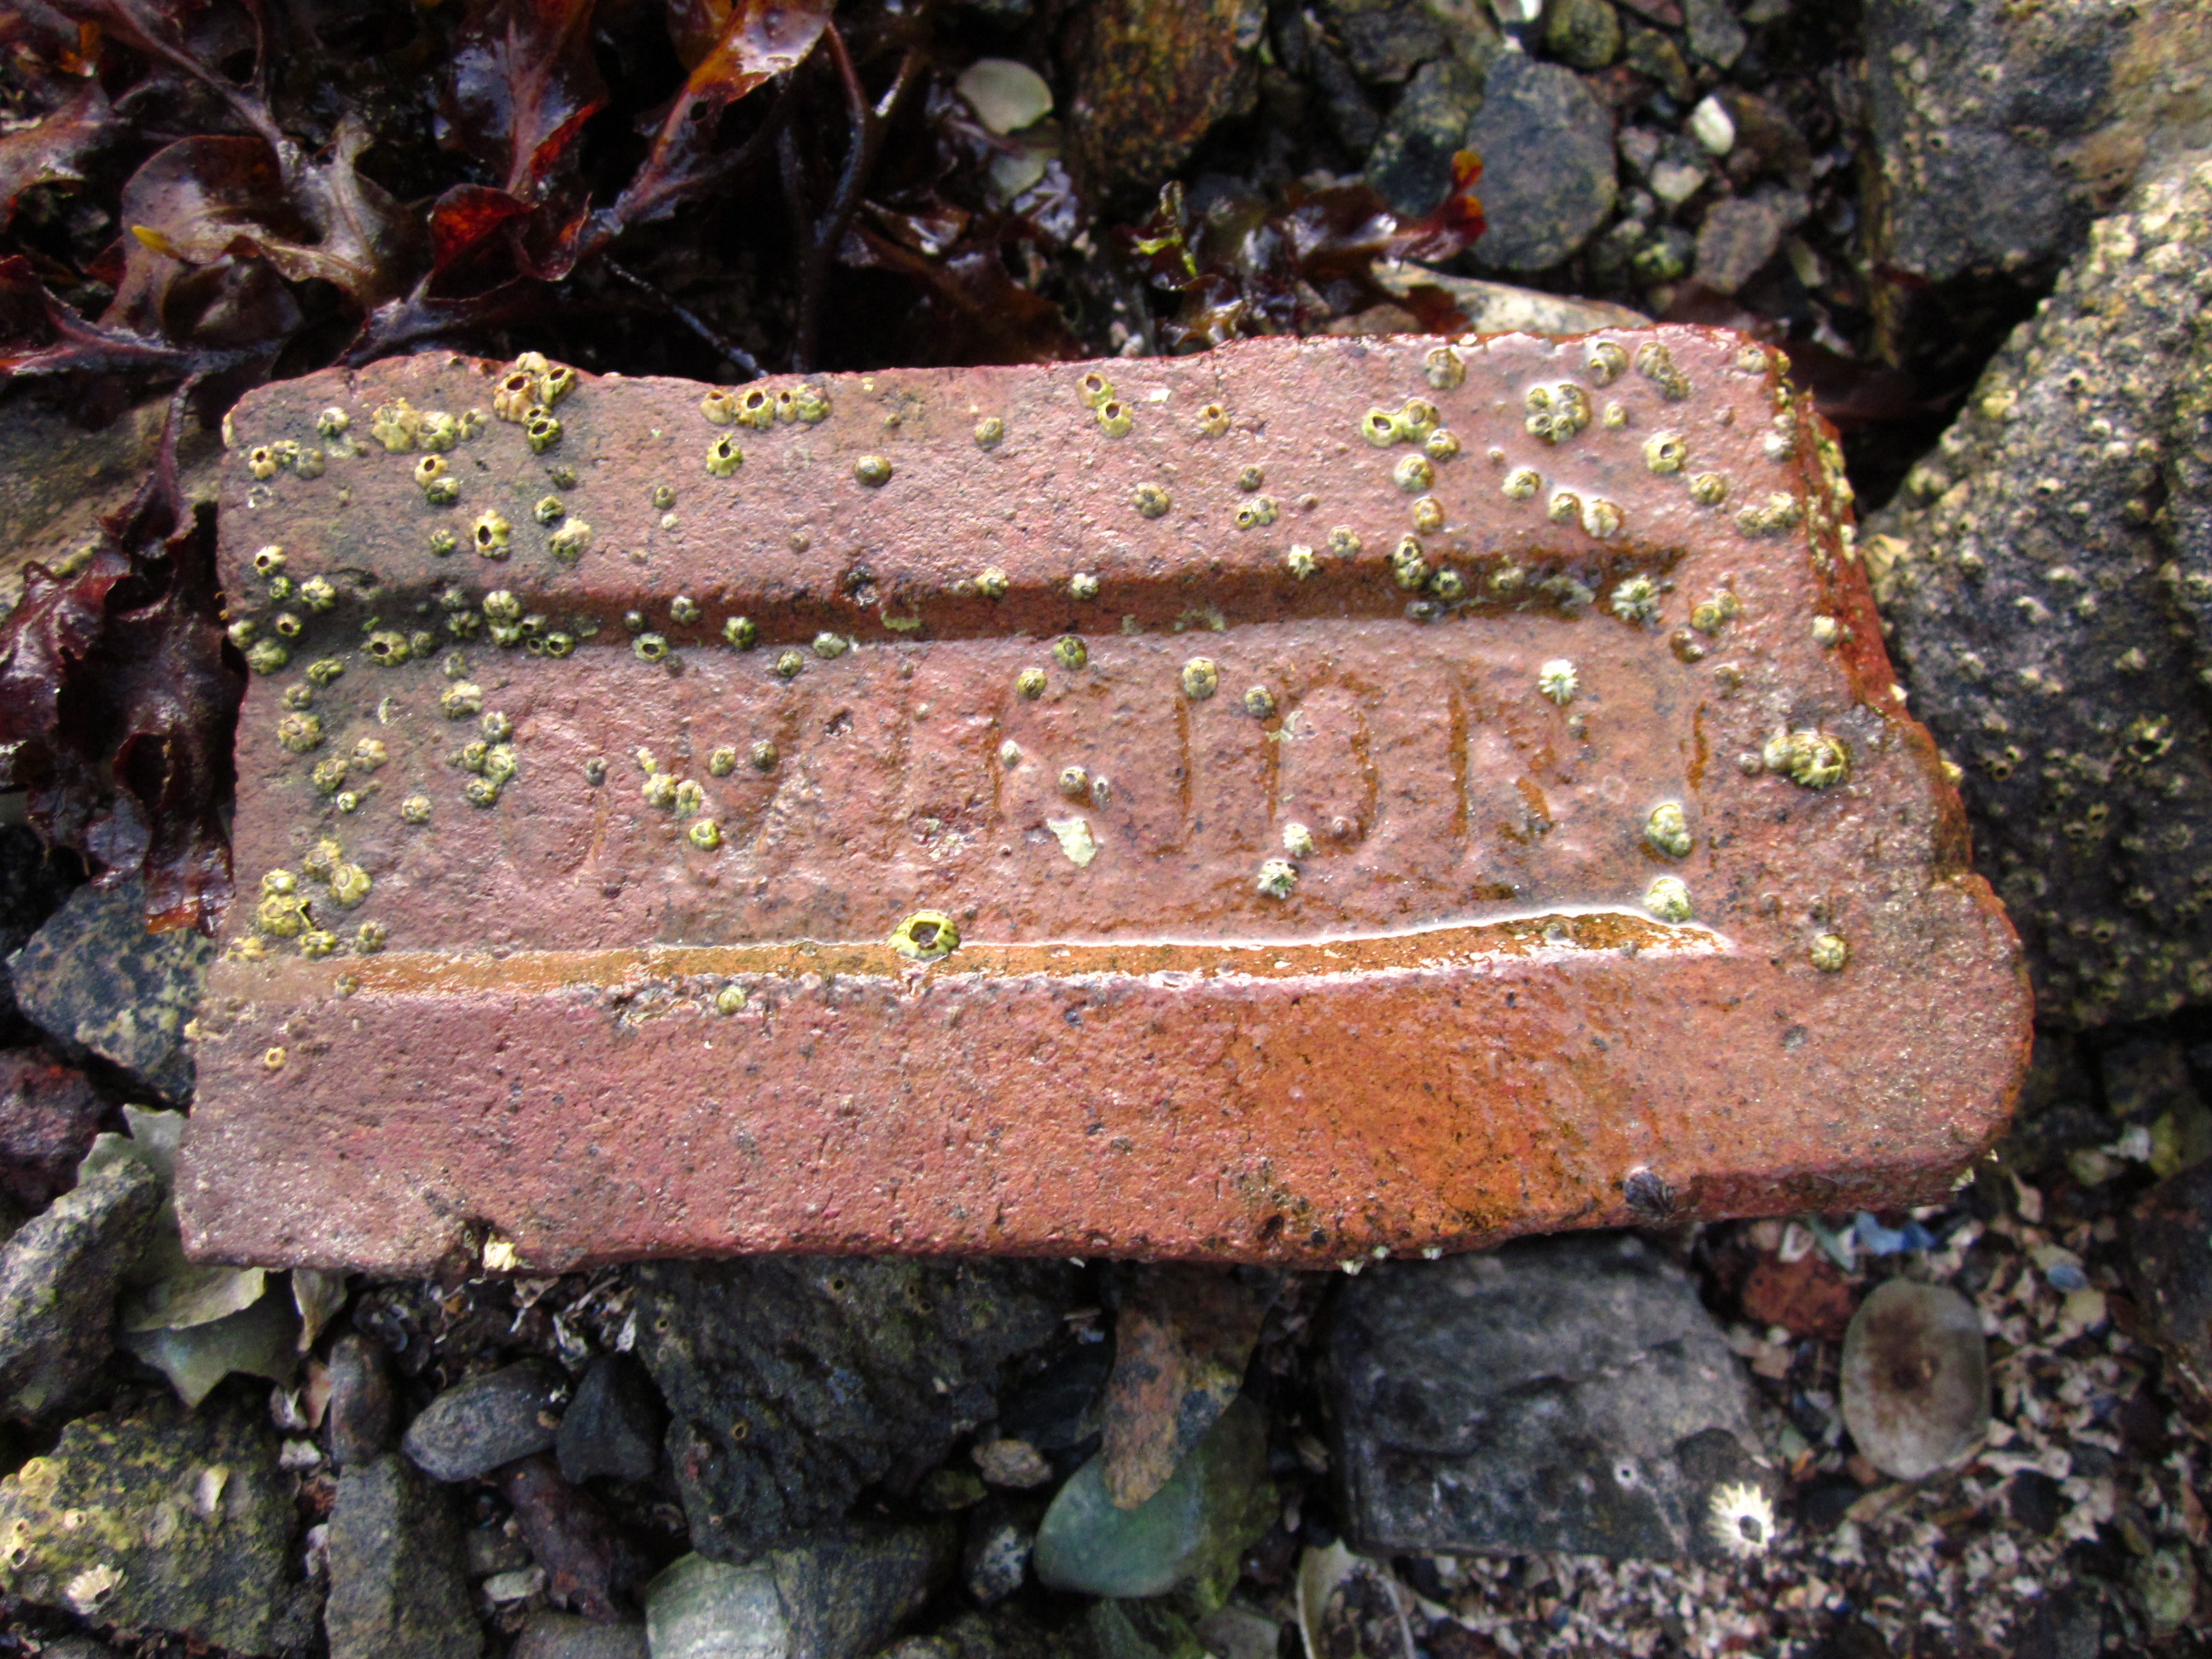 A red clay brick with some sort of text on it and little sea creatures growing on it.